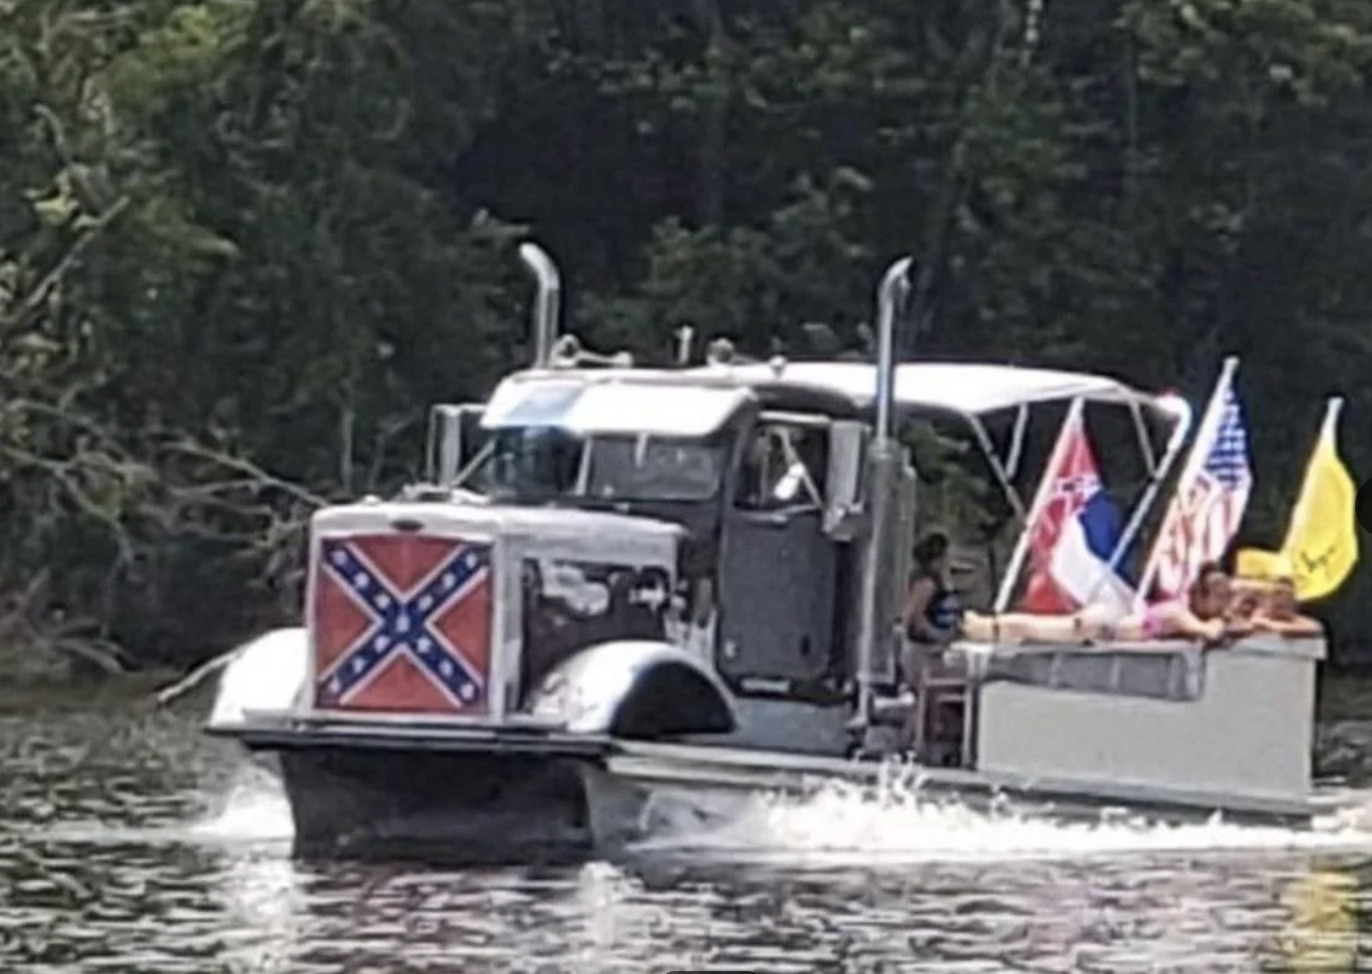 Semi-truck cab converted into a boat with flags, carrying people on a river